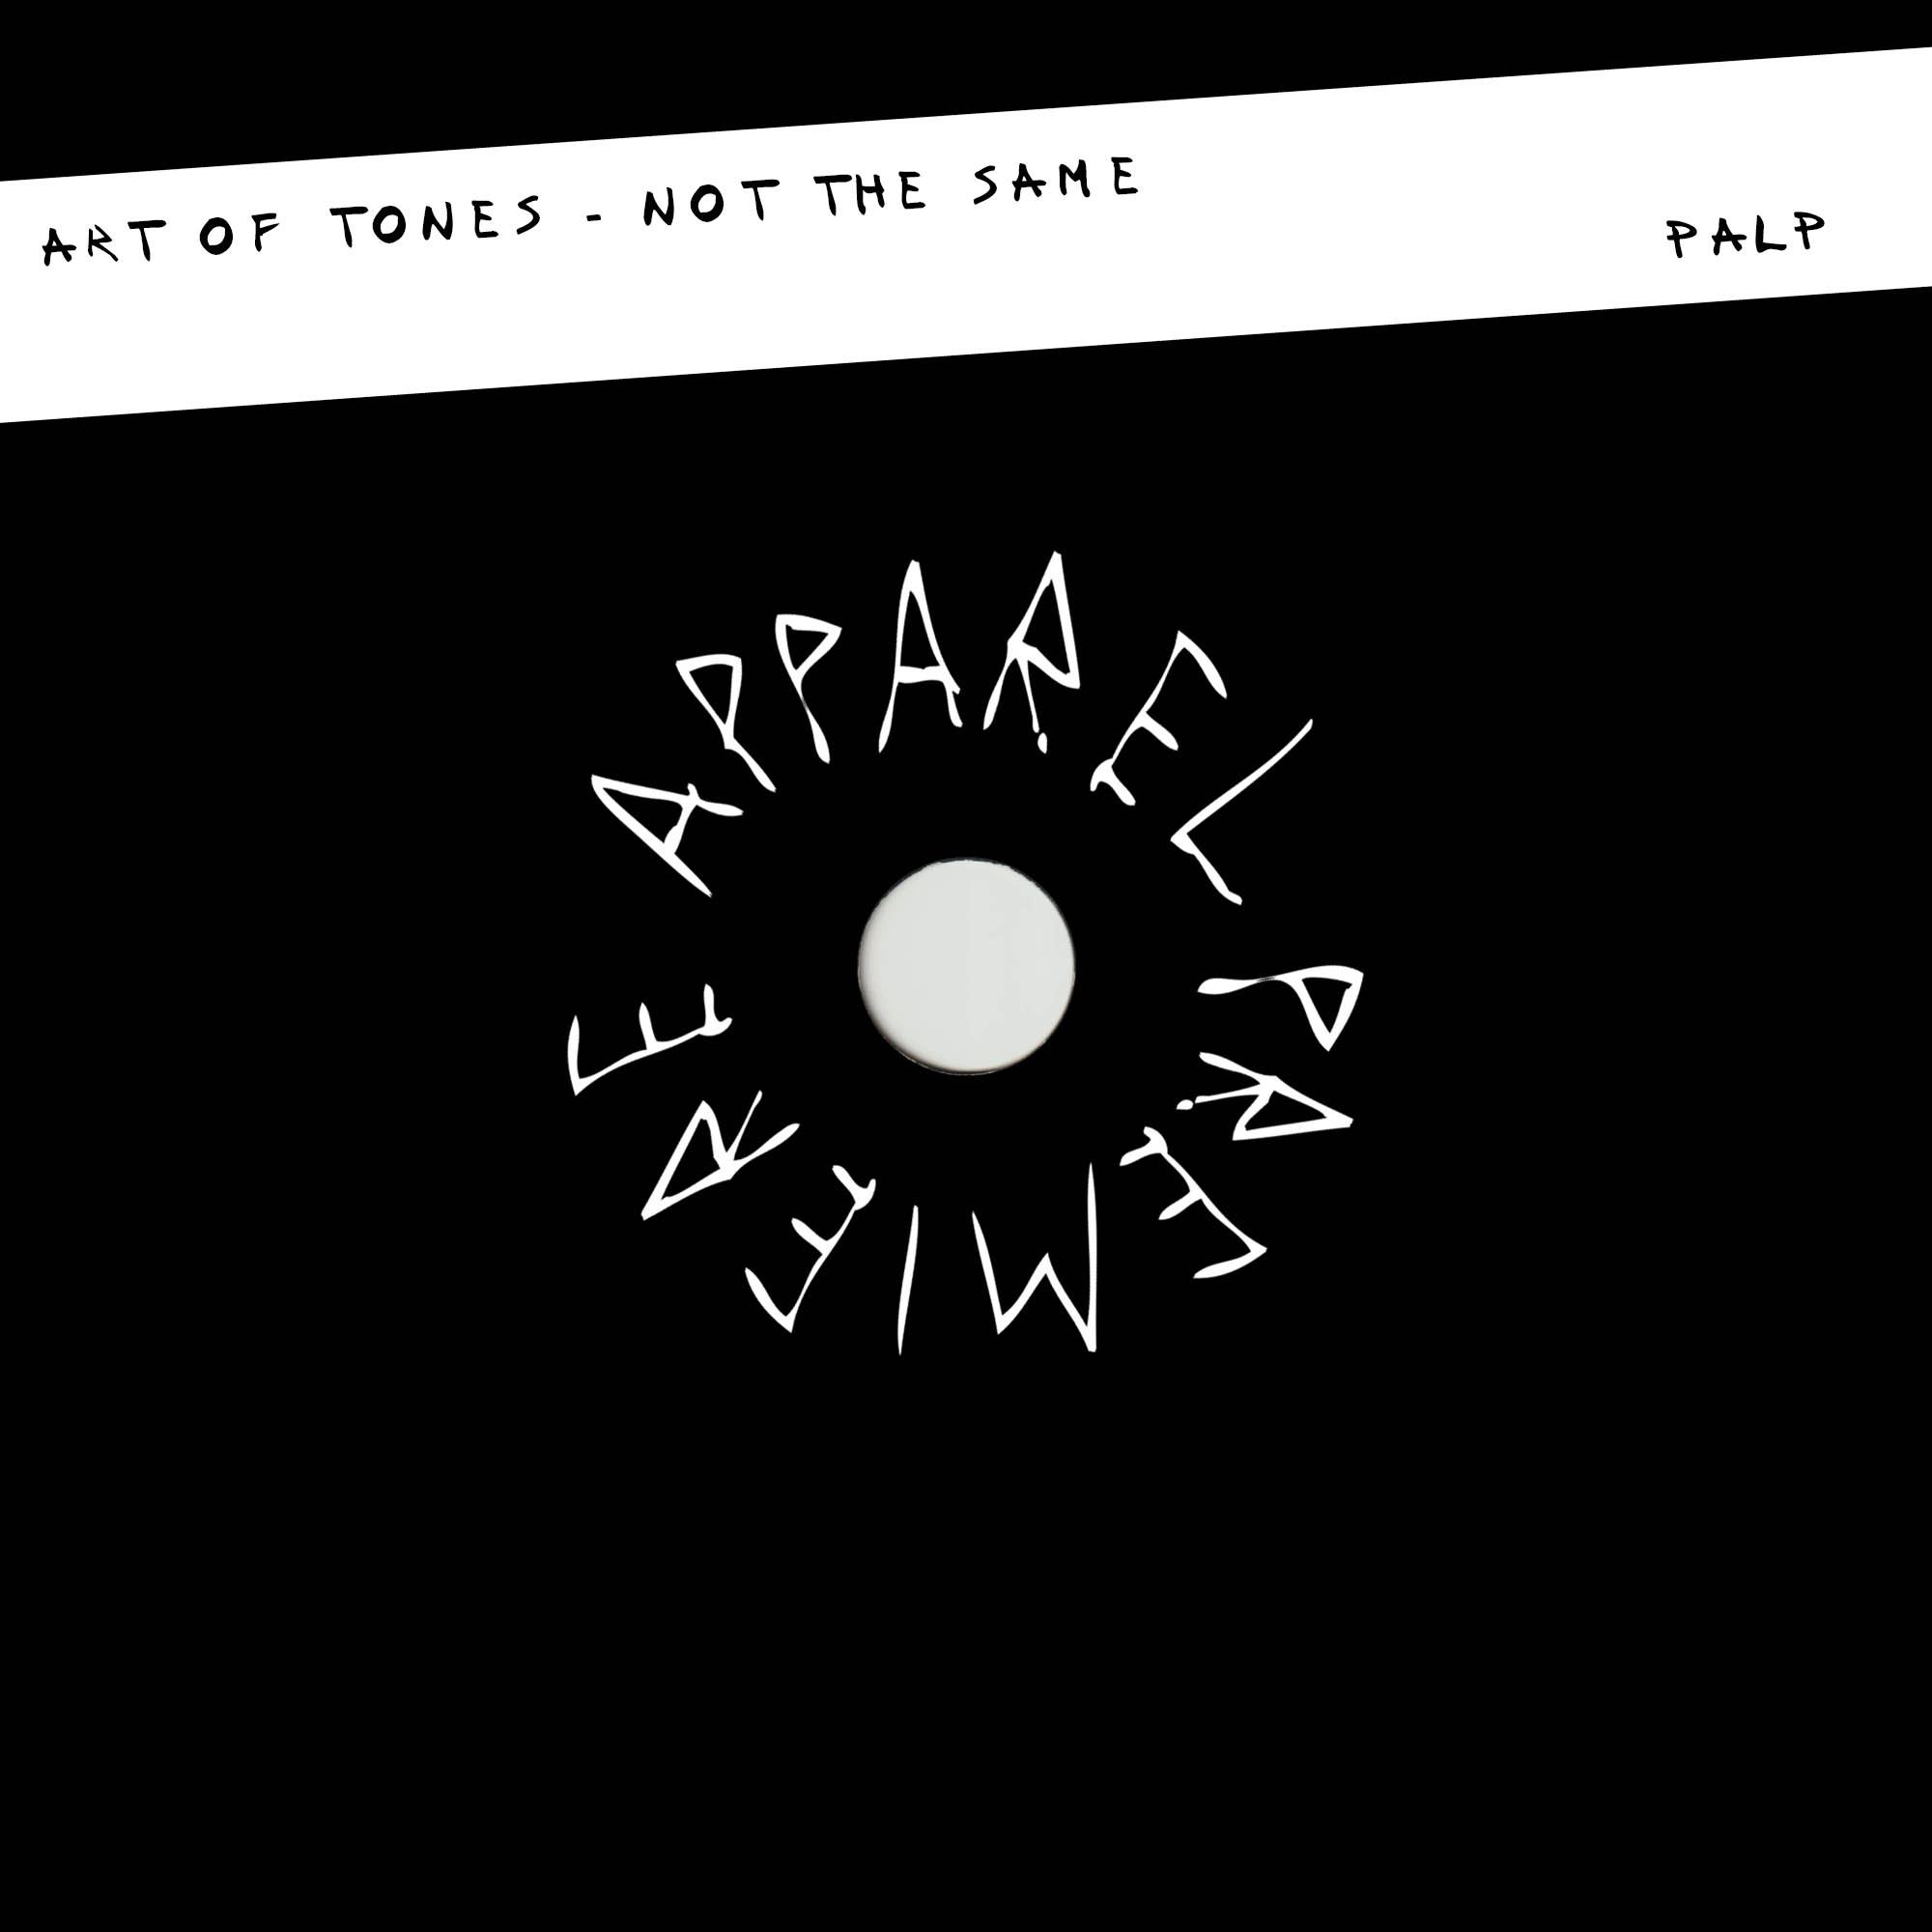 Apparel-Premiere Art Of Tones – Not The Same [PALP]